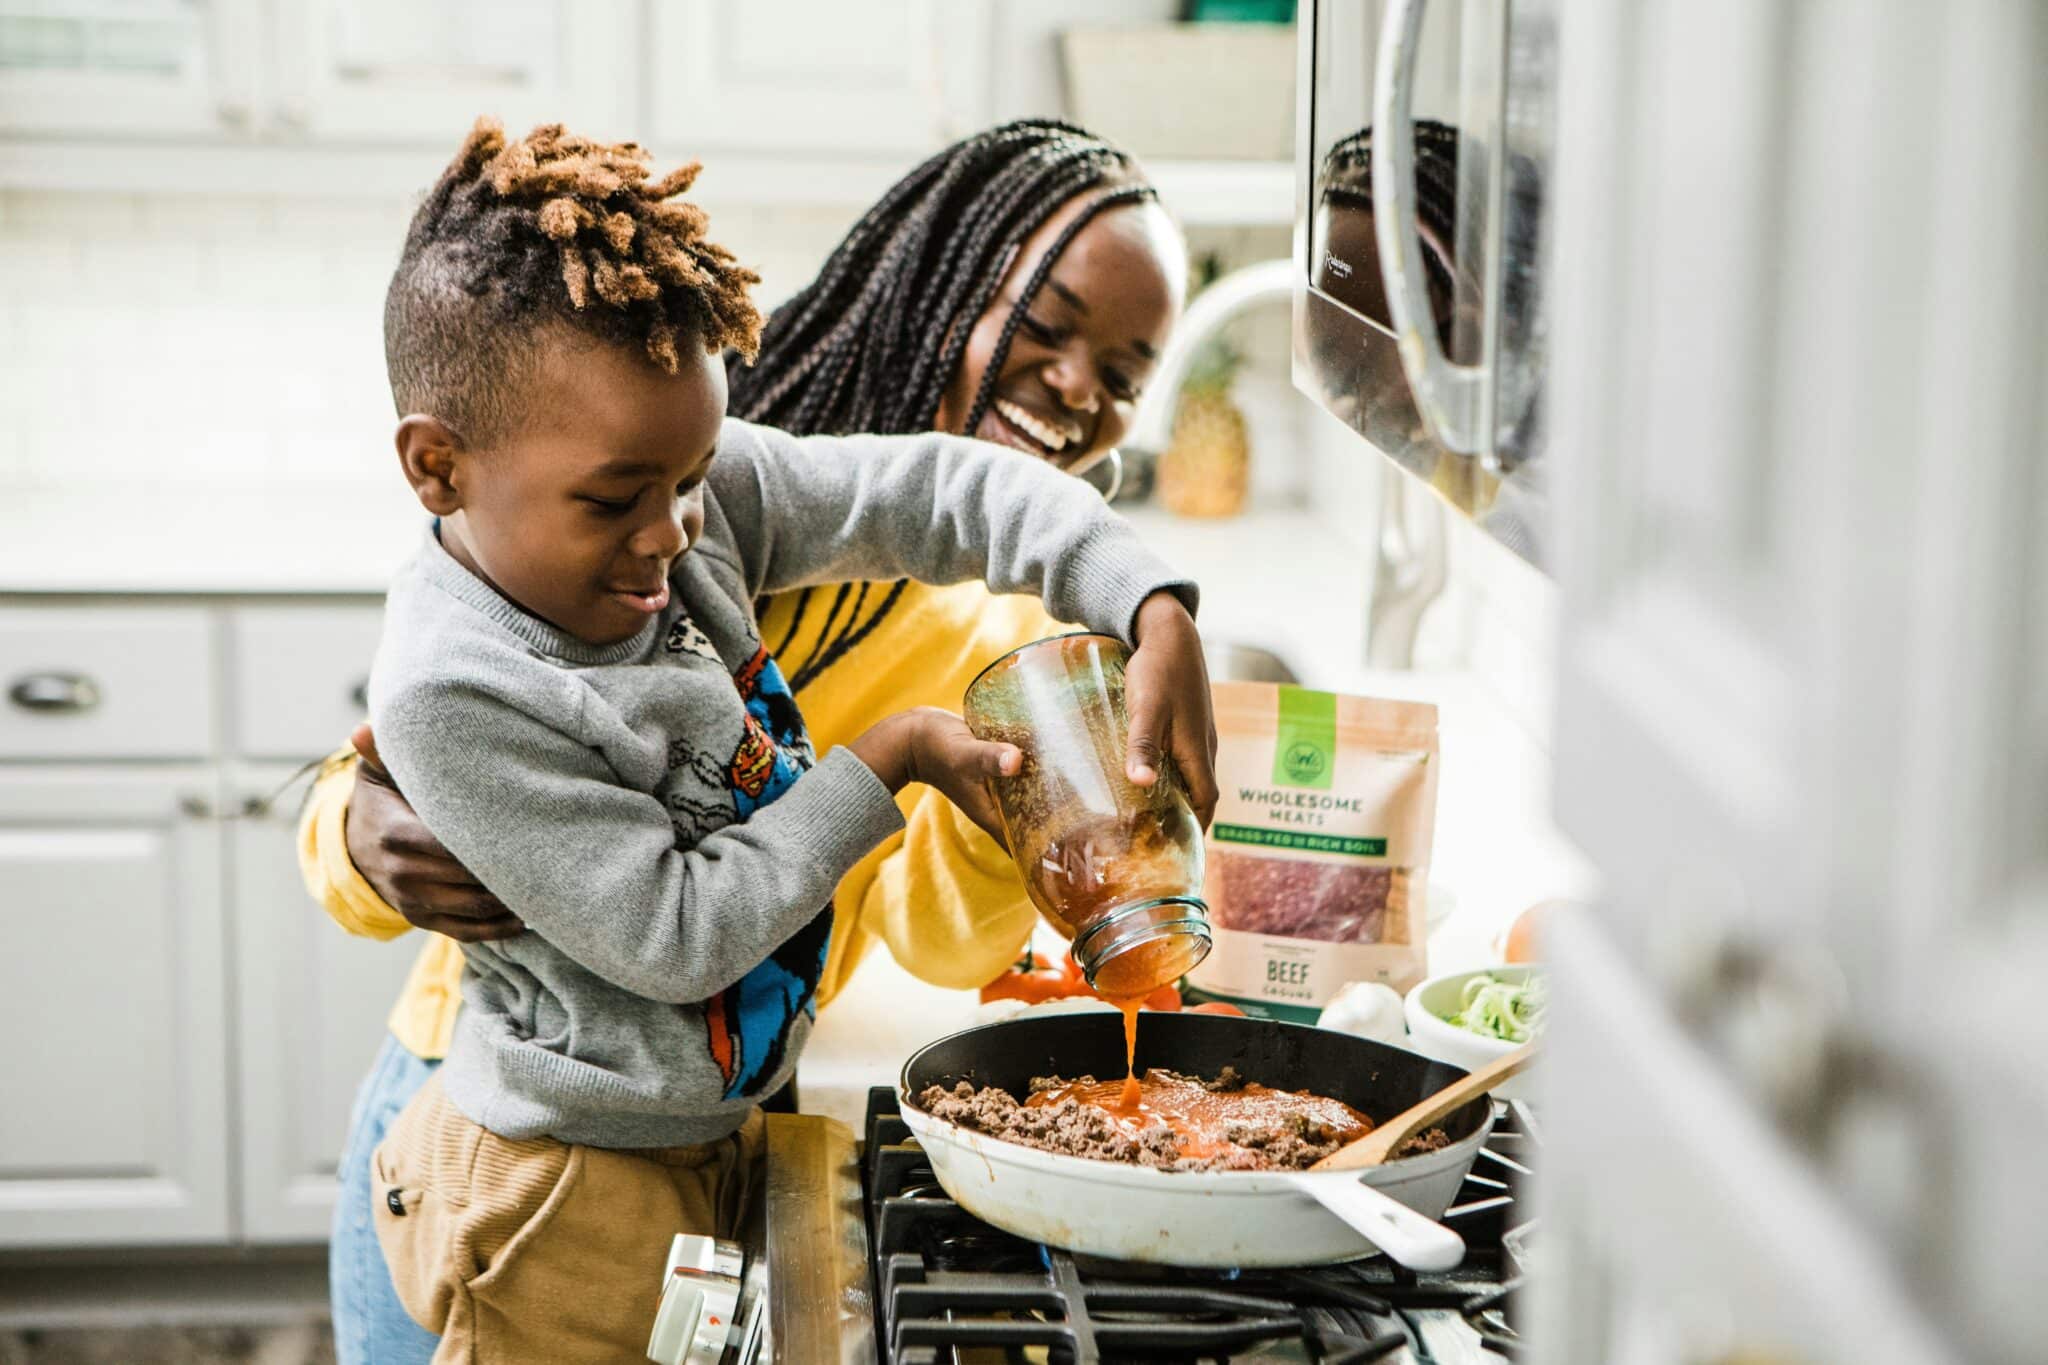 Mother and son cooking | Photo by Brooke Lark on Unsplash